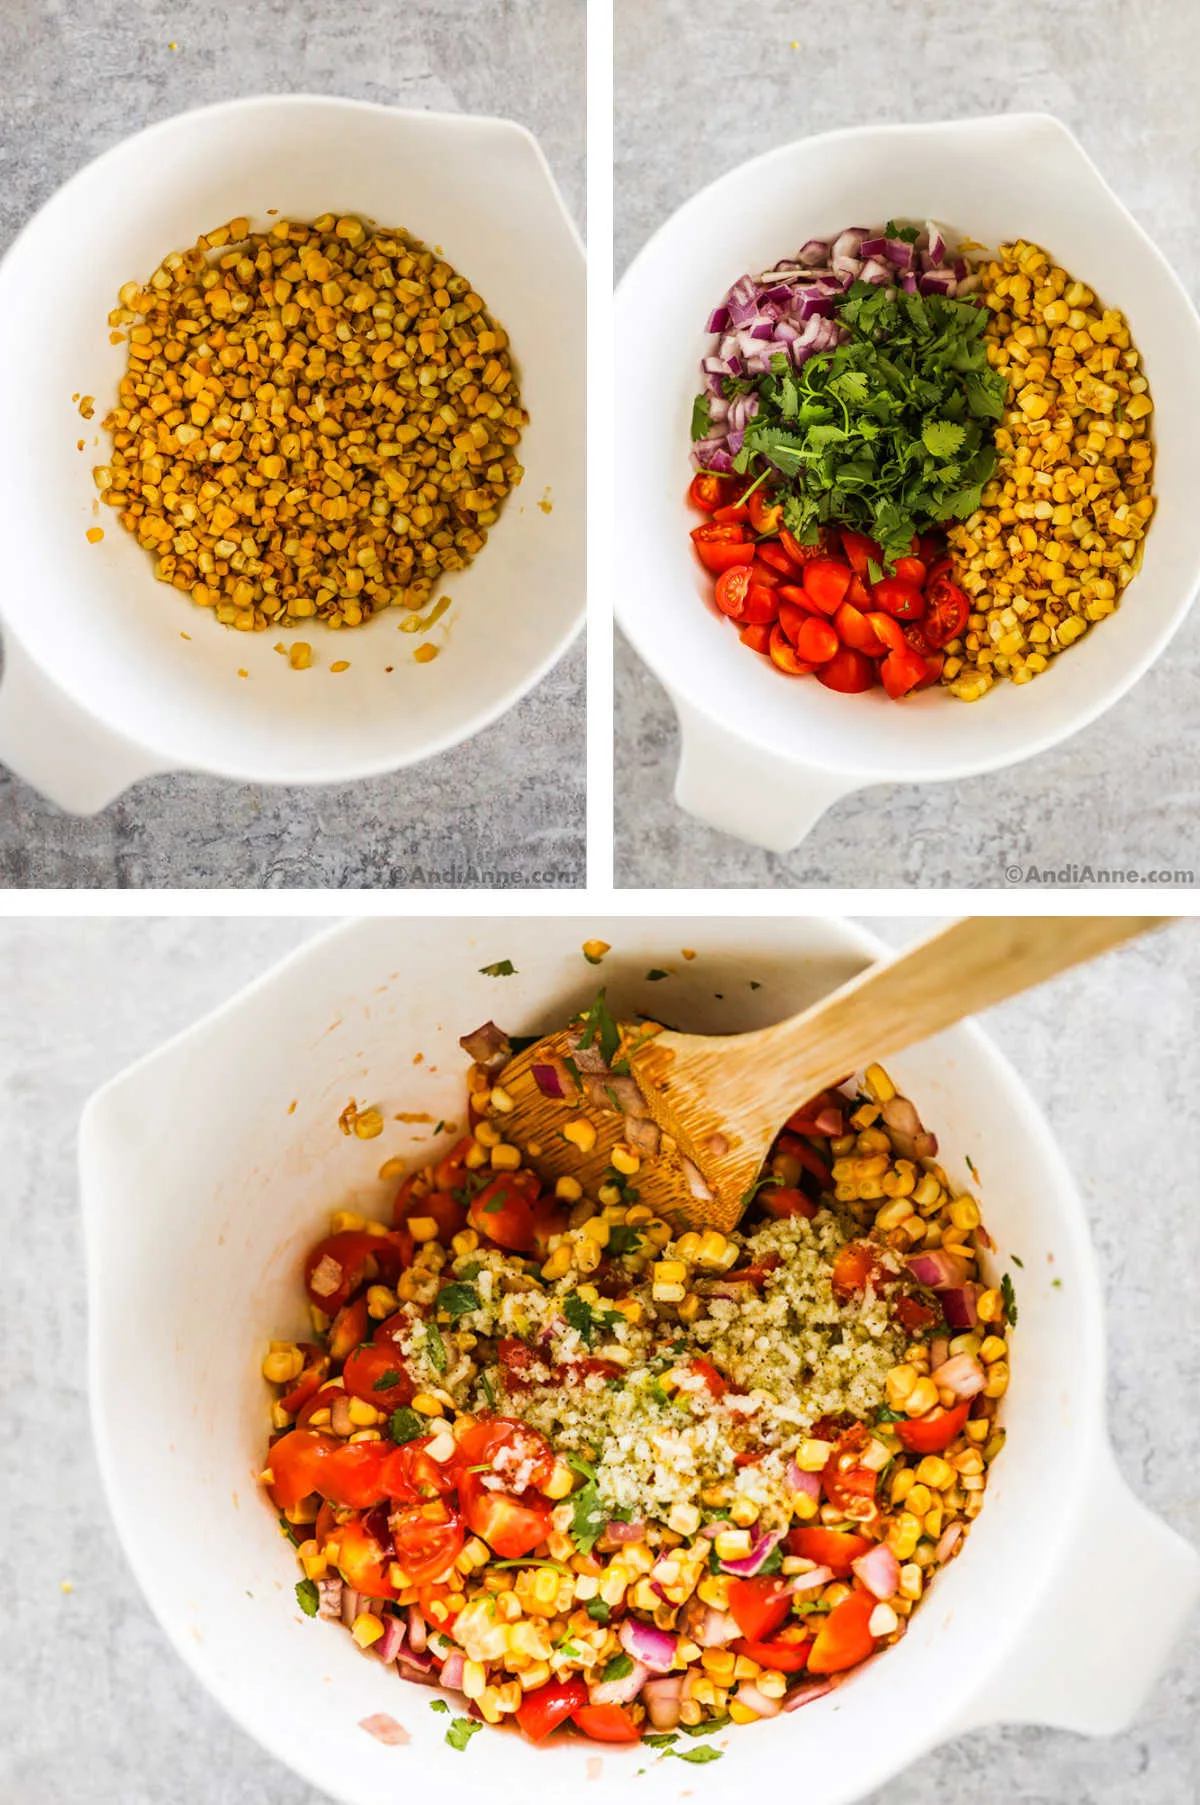 Three overhead images in one: 1. Corn is added to a white bowl. 2. Tomatoes, onion and cilantro are added to the bowl. 3. Salad dressing is added and Ingredients are mixed. 